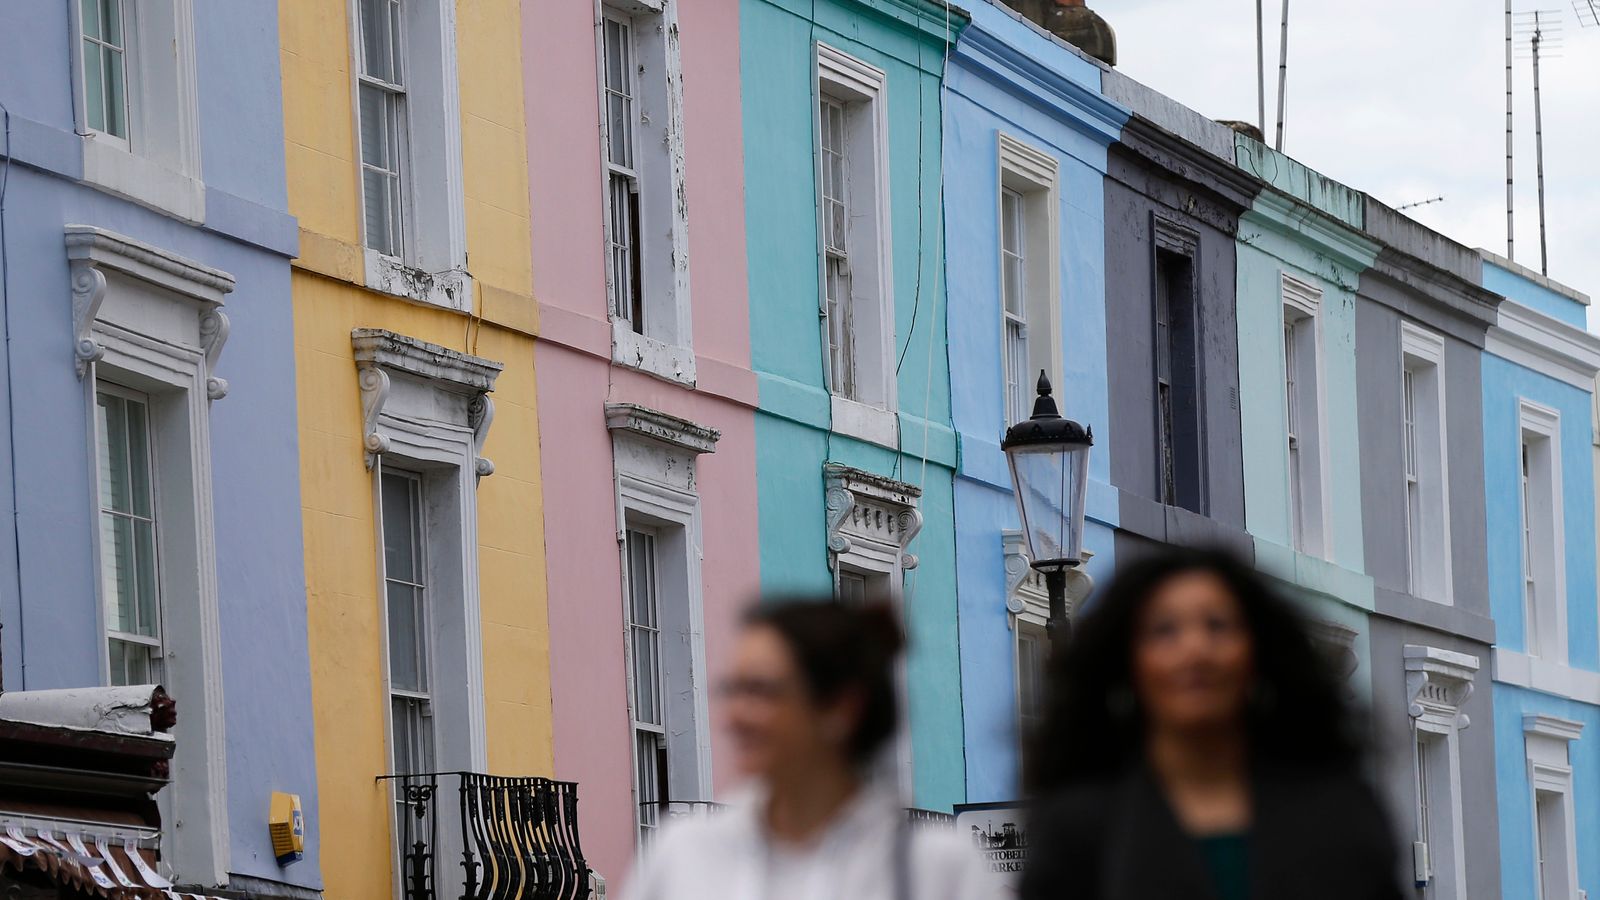 UK house prices creep up as experts predict 'smoother year' for buyers and sellers